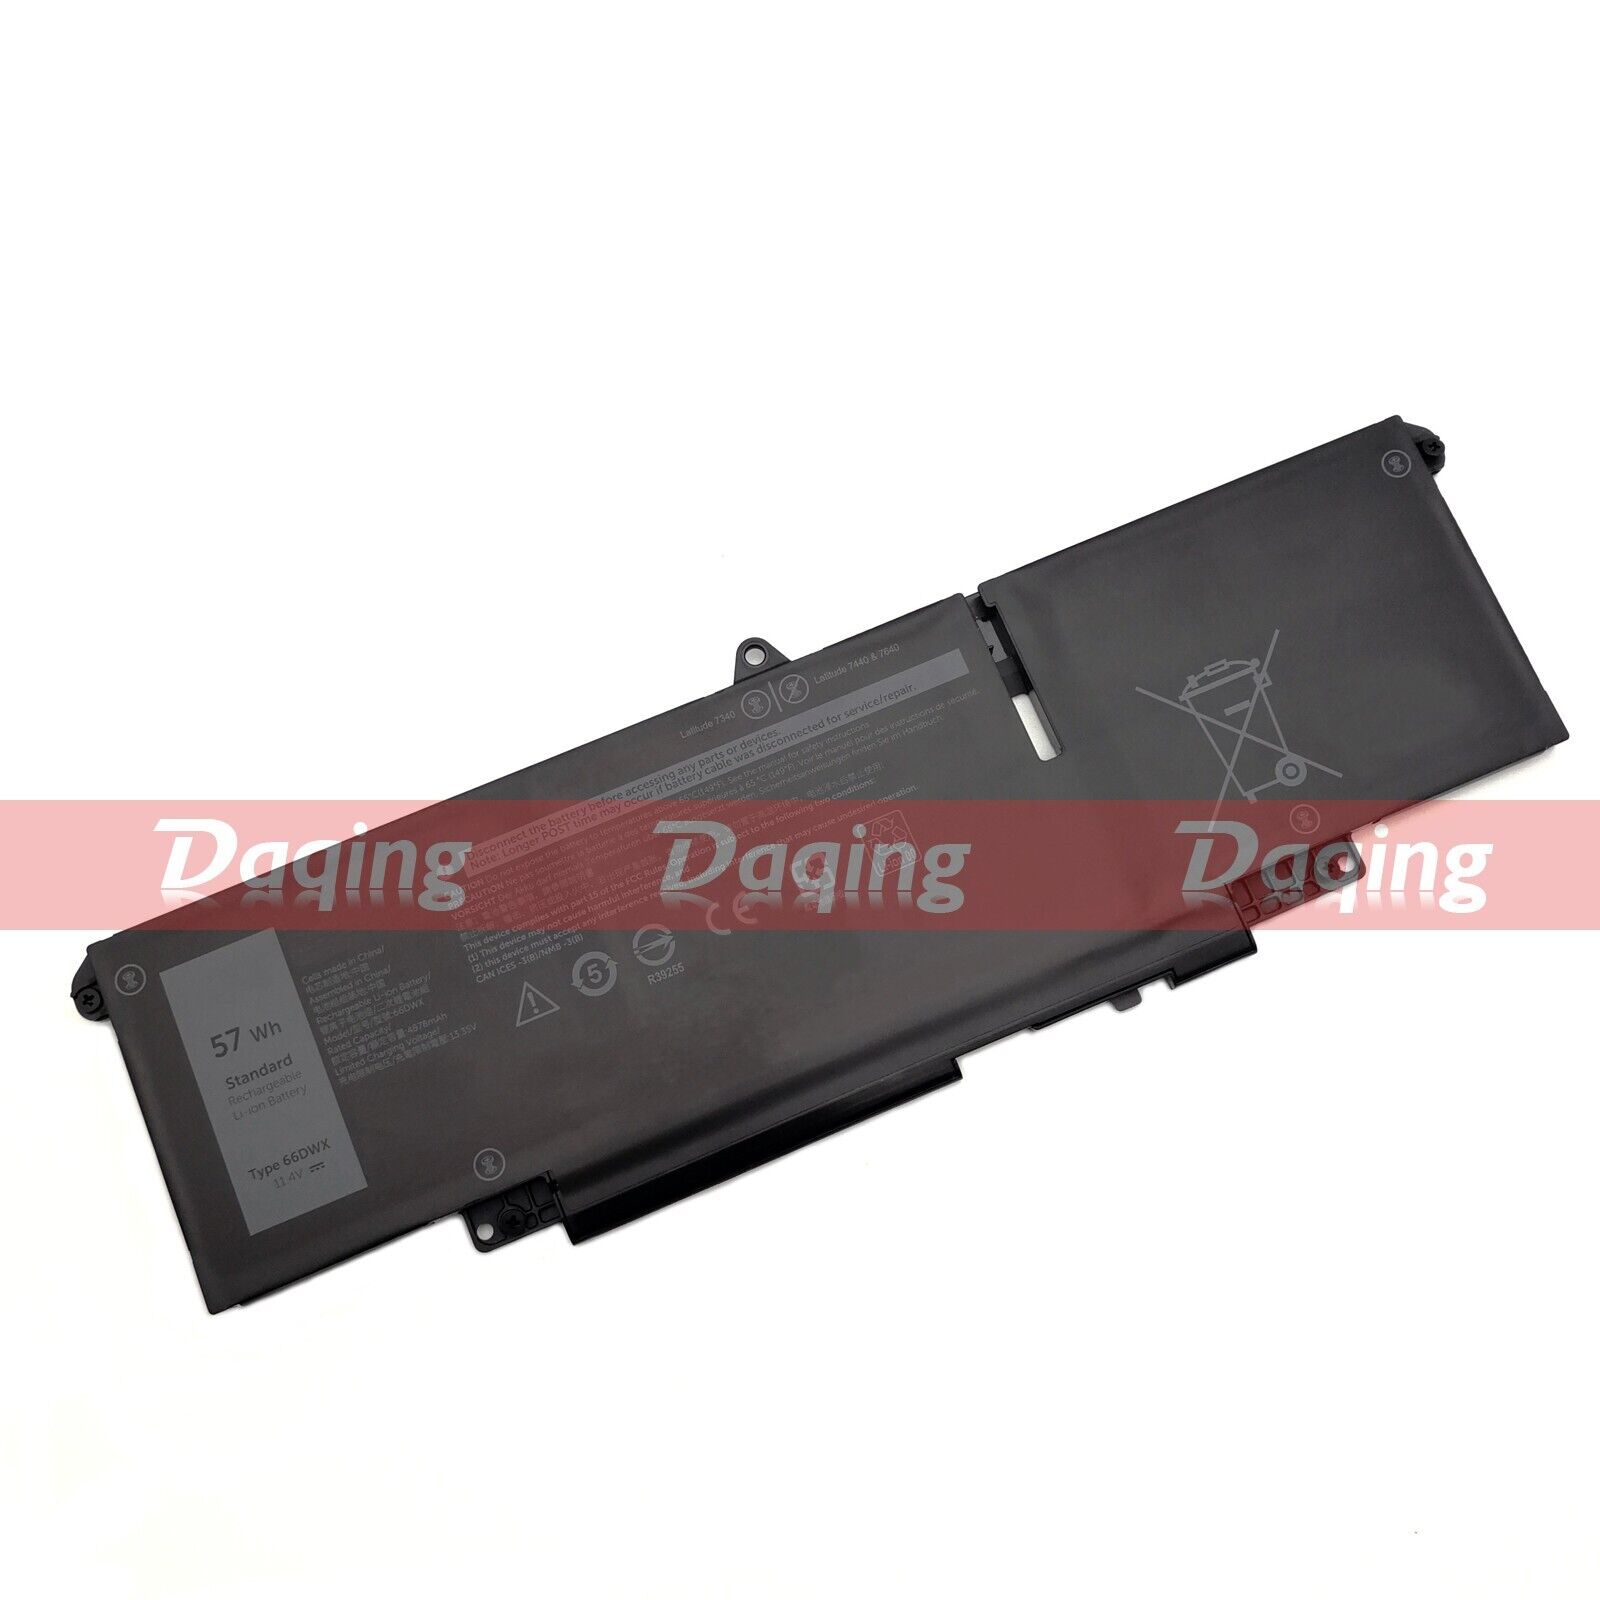 New 66DWX 57Wh Battery for Dell Latitude 7340 7440 7640 3ICP6/65/78 0HYH8 0CTJJ6